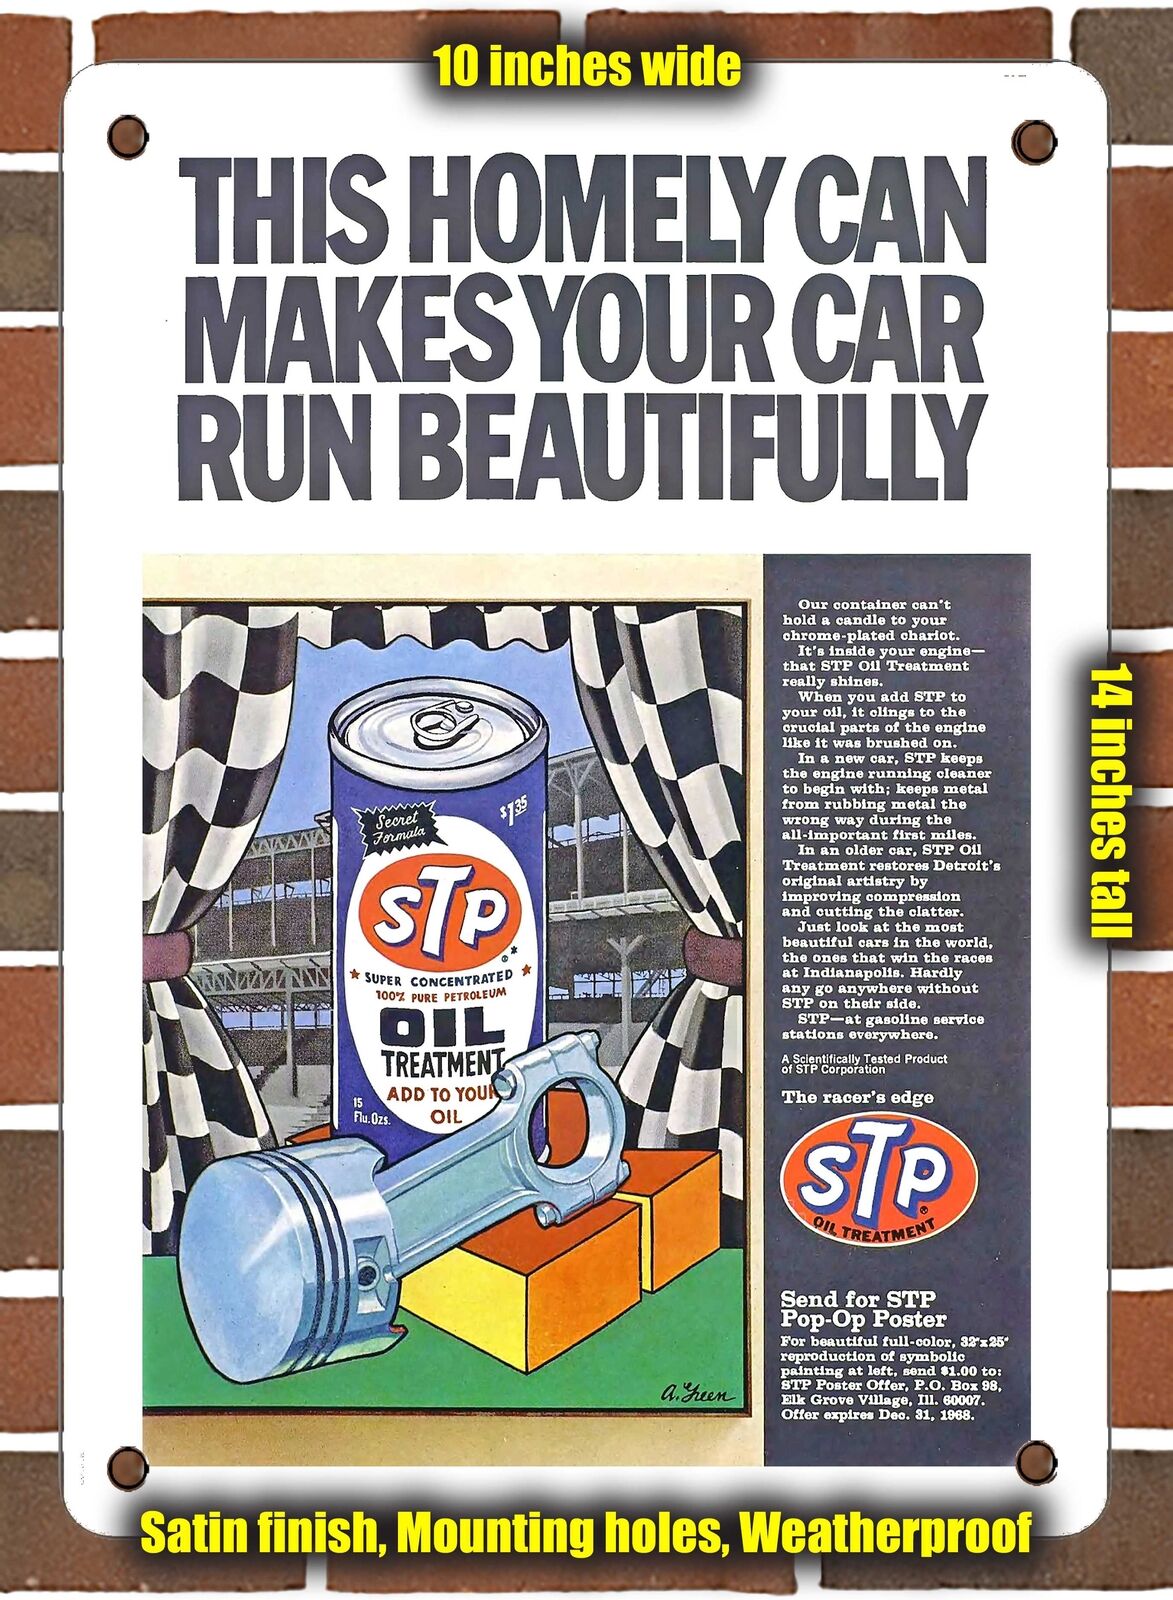 METAL SIGN - 1968 This Homely Can Makes Your Car Run Beautifully STP - 10x14\